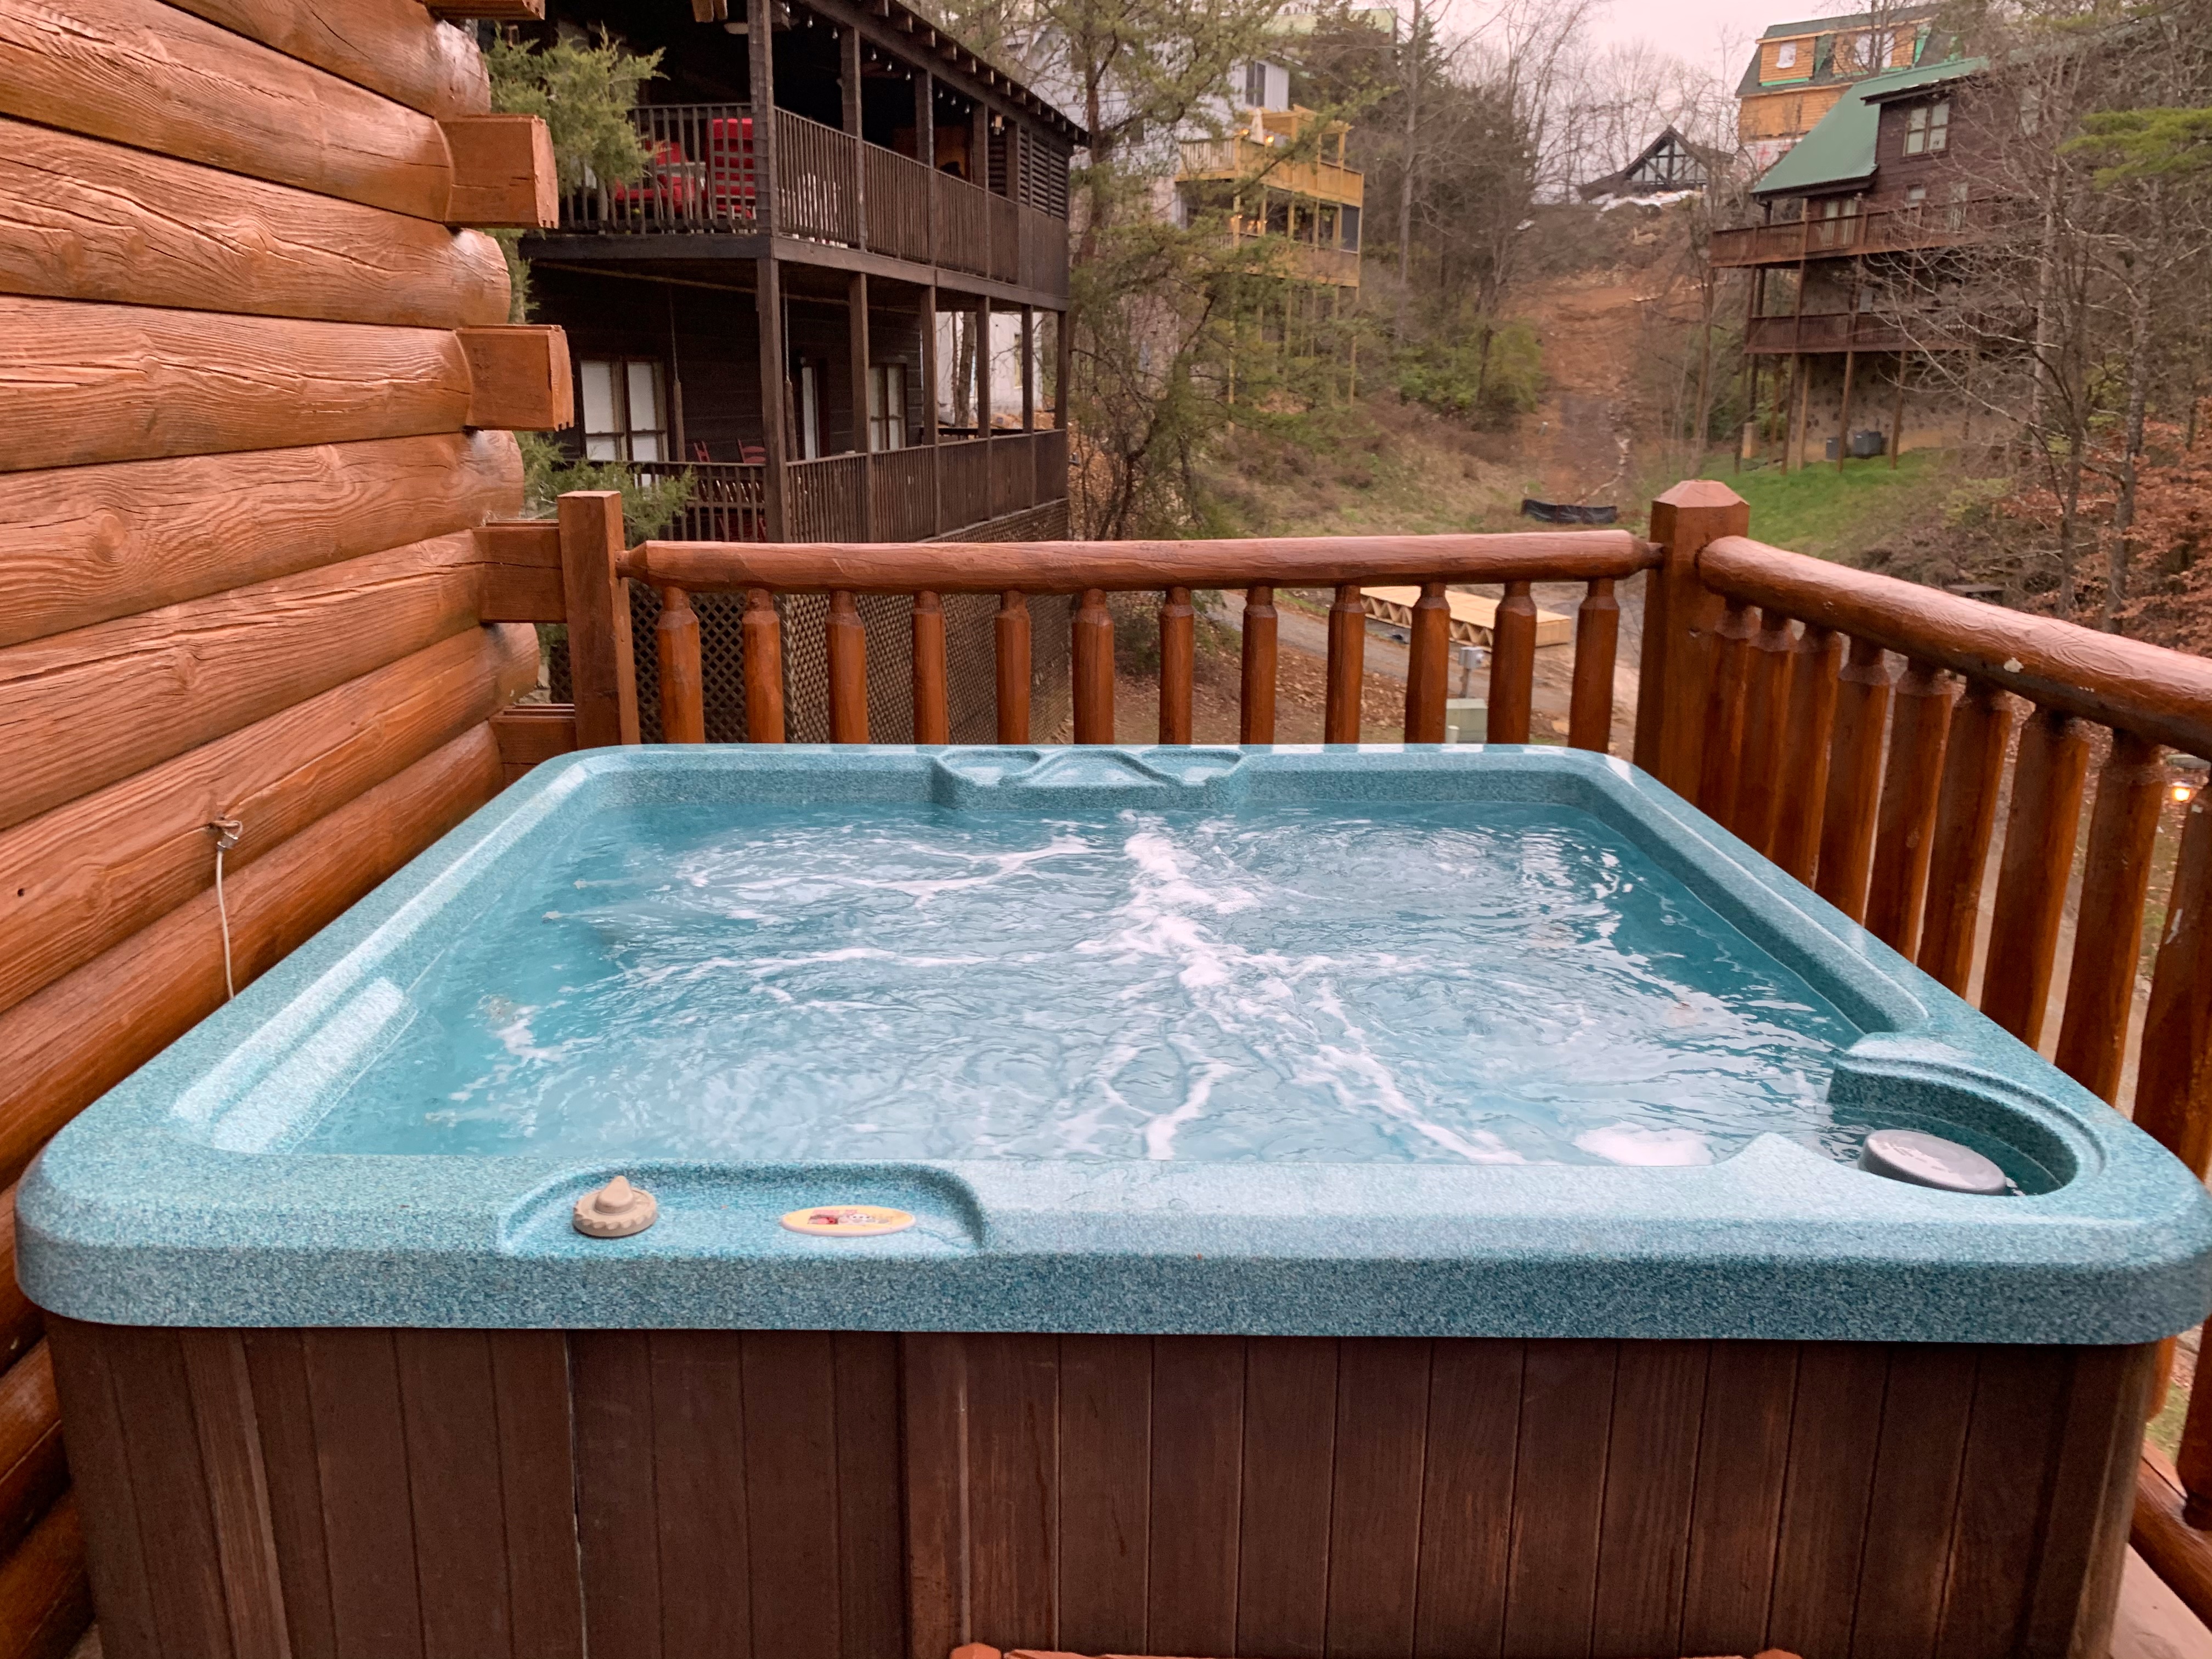 Time to soak in the hot tub